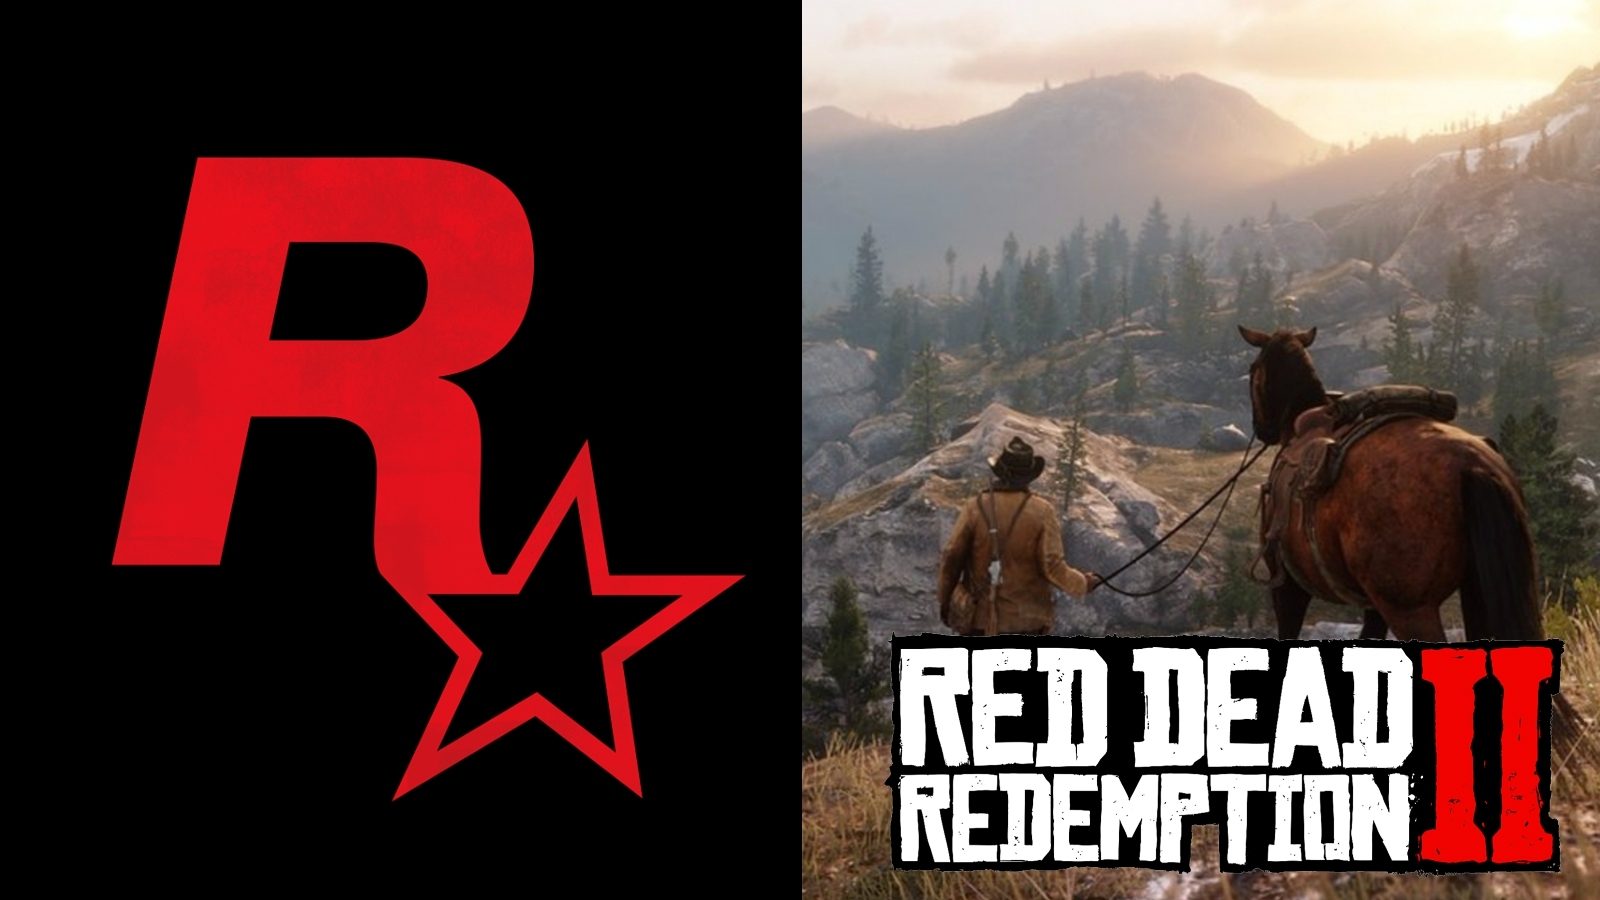 tough hug extinction Red Dead Redemption 2 sales achieve single-biggest opening weekend in  entertainment history - Dexerto